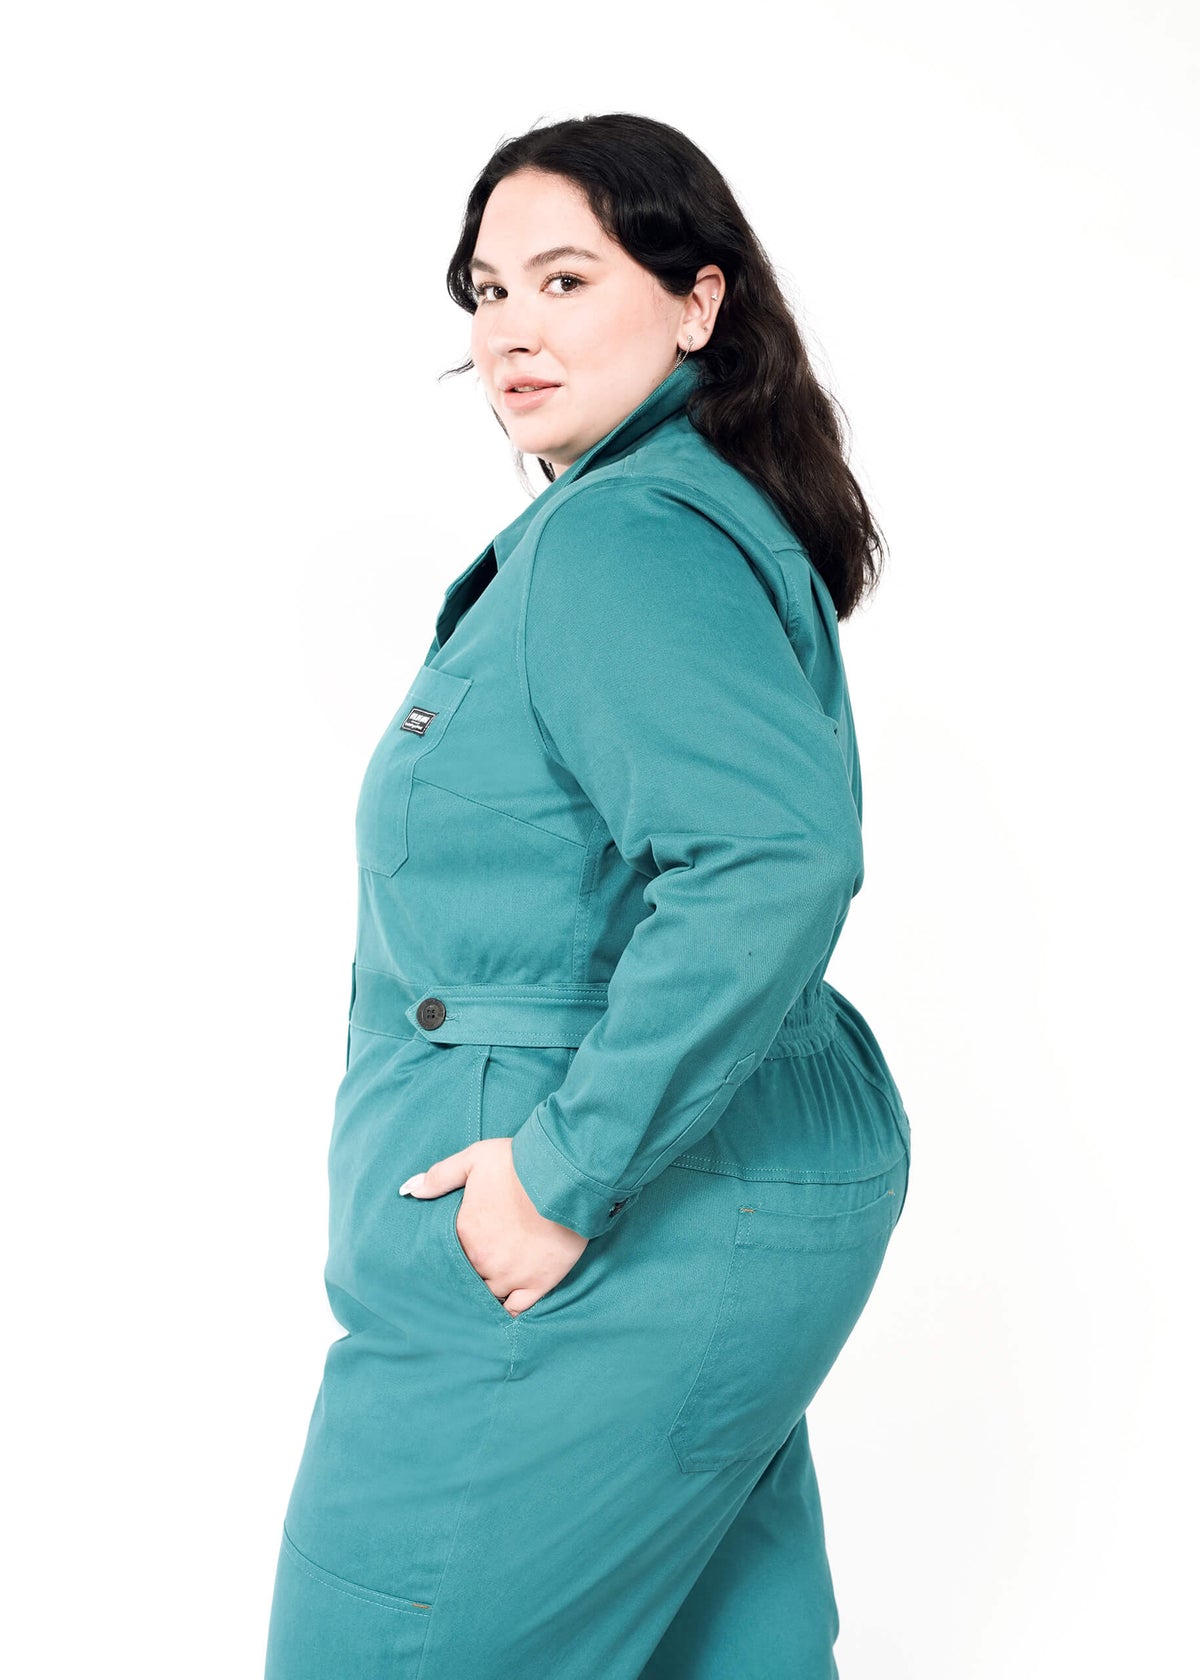 The Essential Long Sleeve High Waisted Coverall